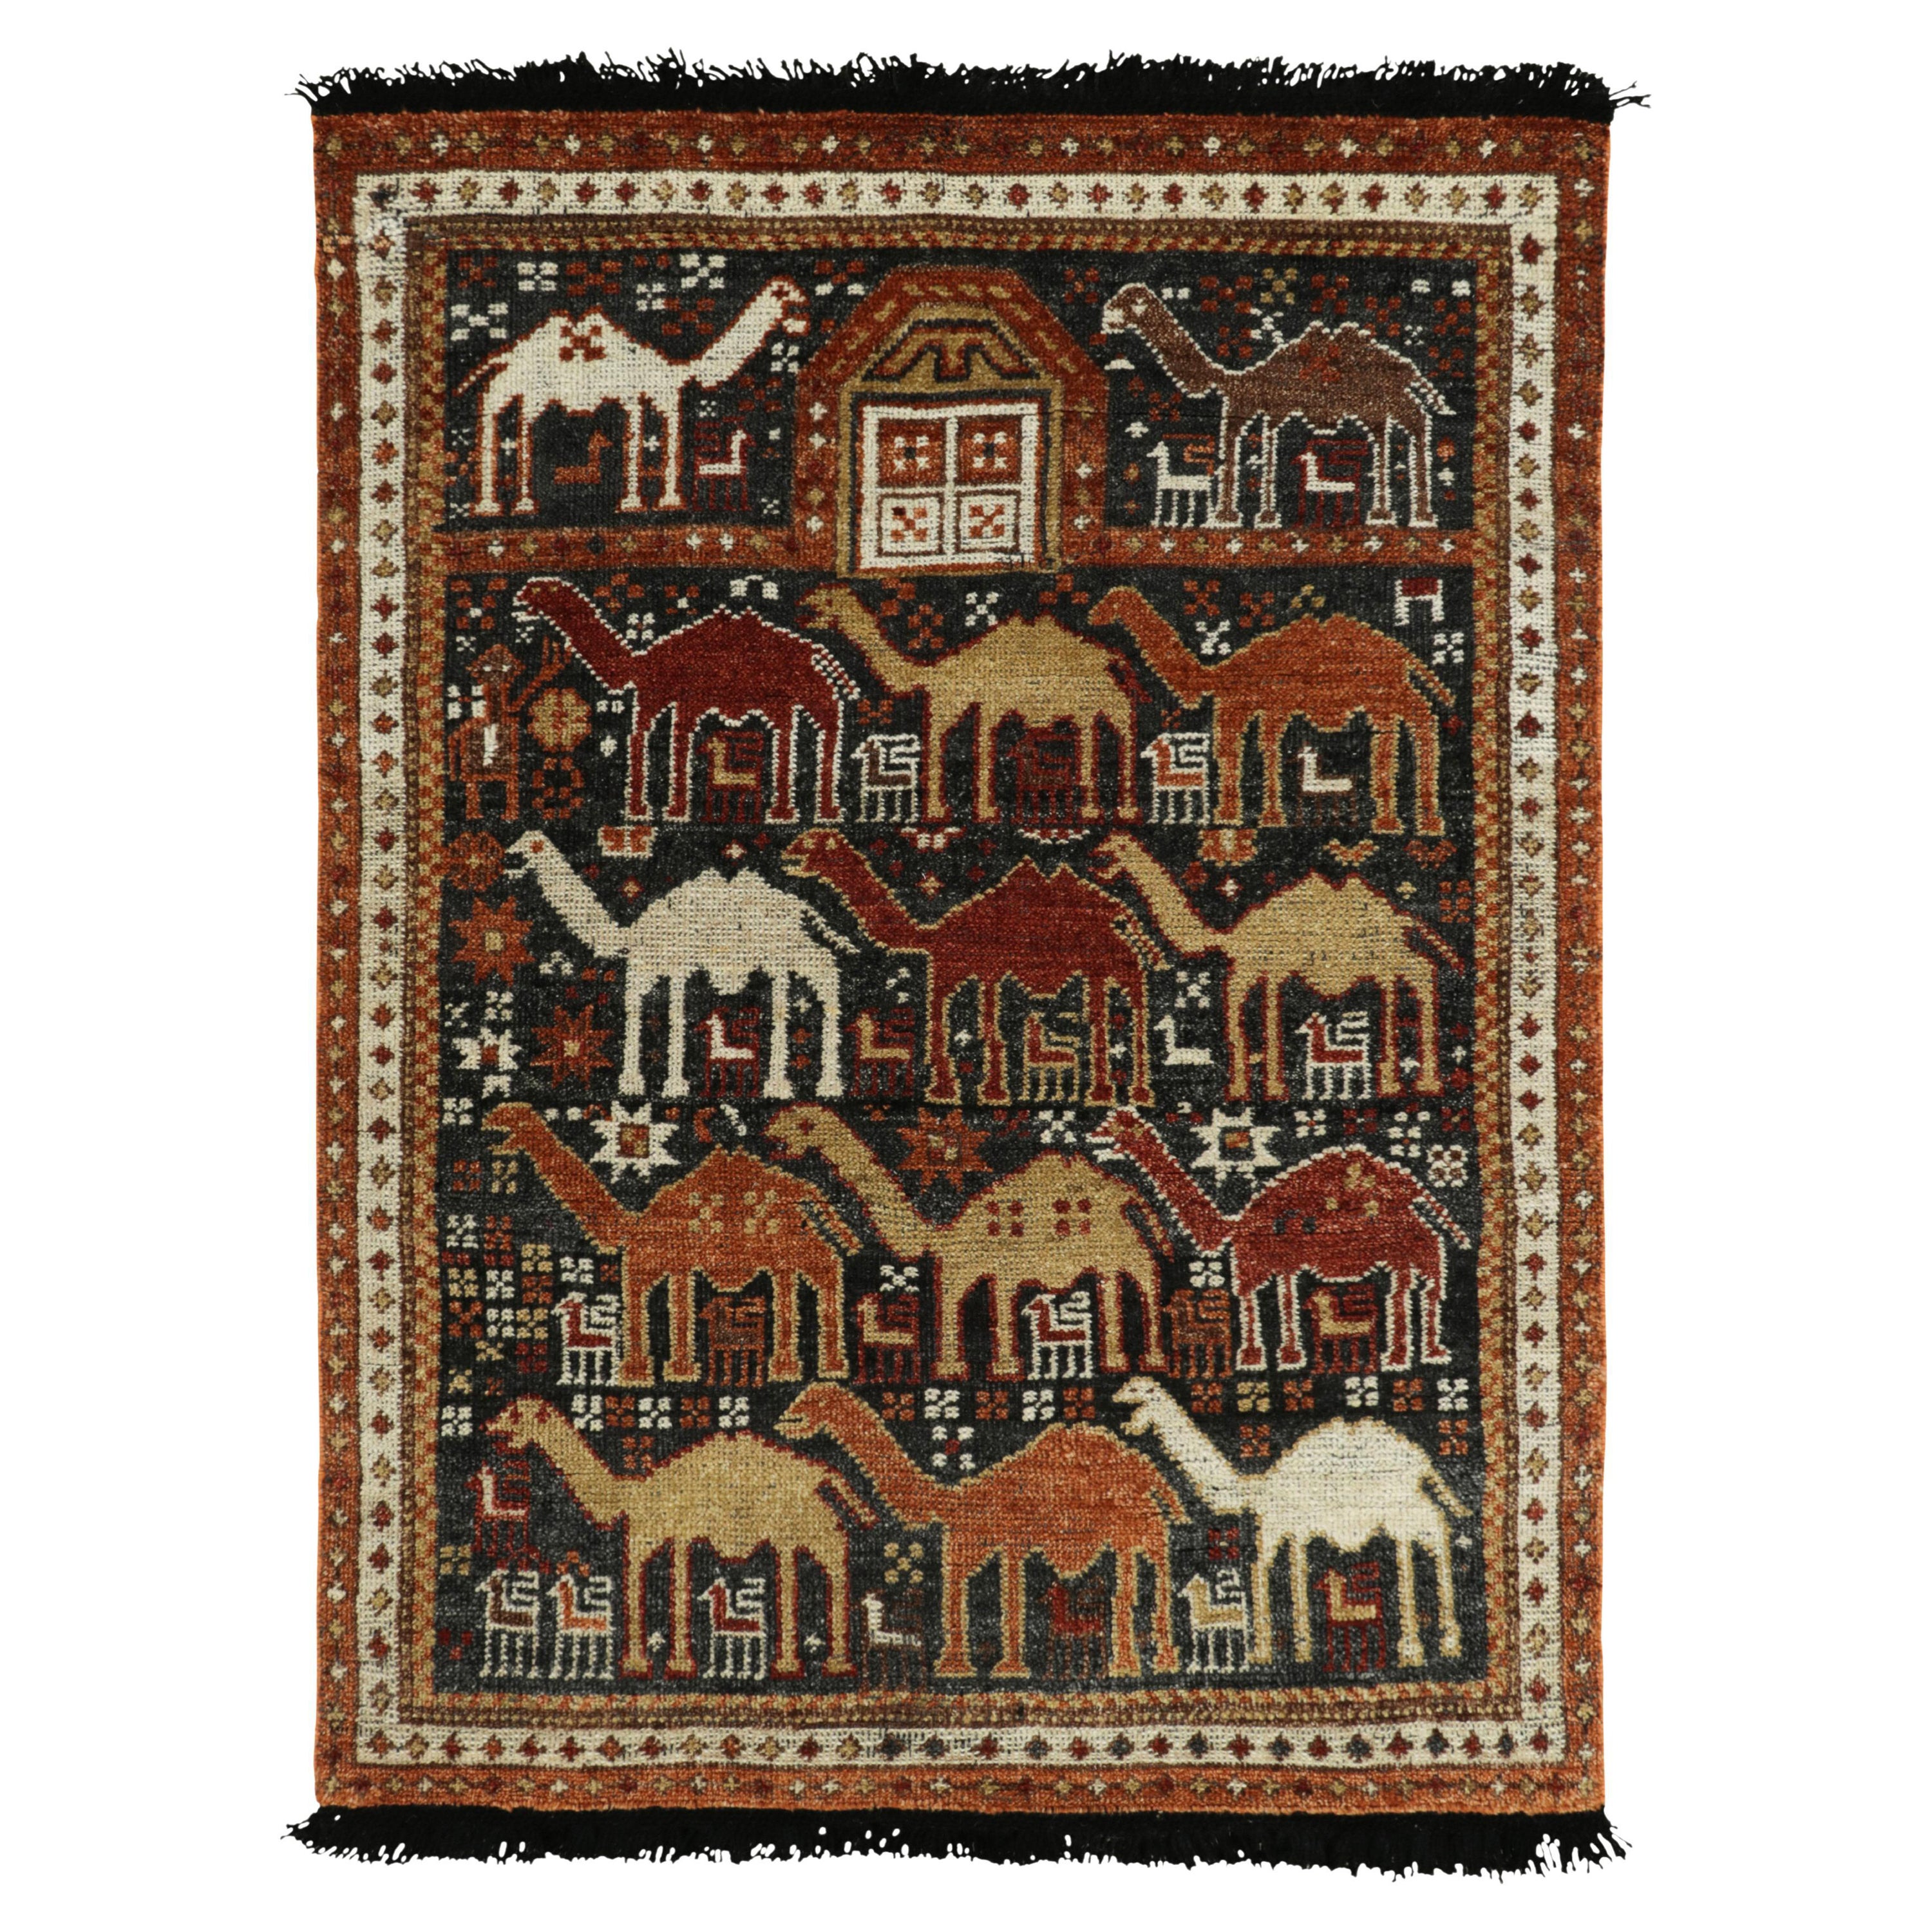 Rug & Kilim's Tribal Style Rug in Red, Orange-Brown, Pictorial Pattern For Sale